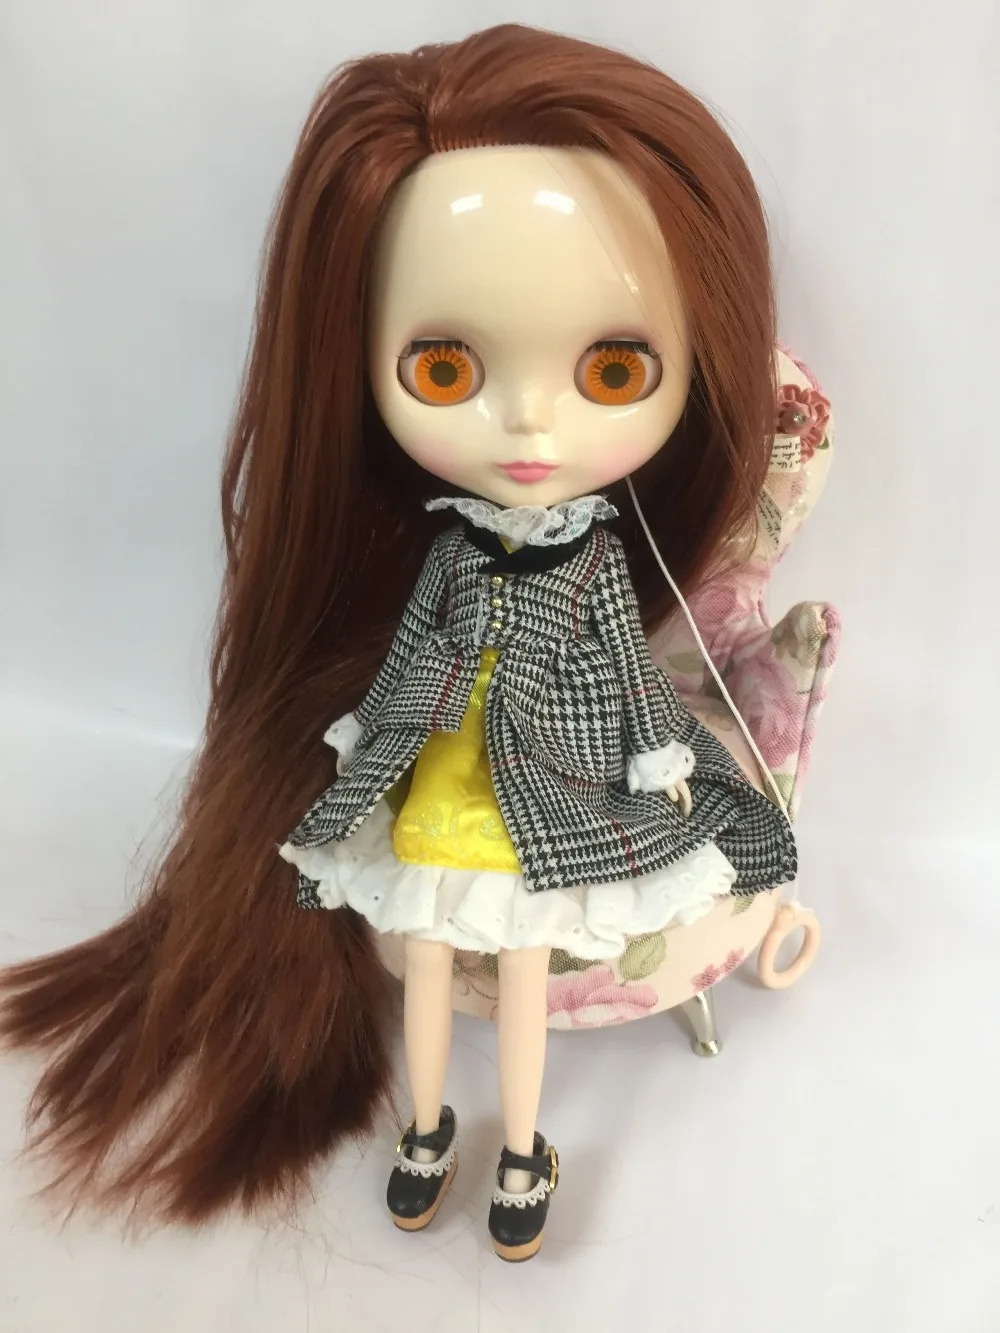 Neo Doll Nude Blyth Doll For Sale UK For Baby Girls gift 